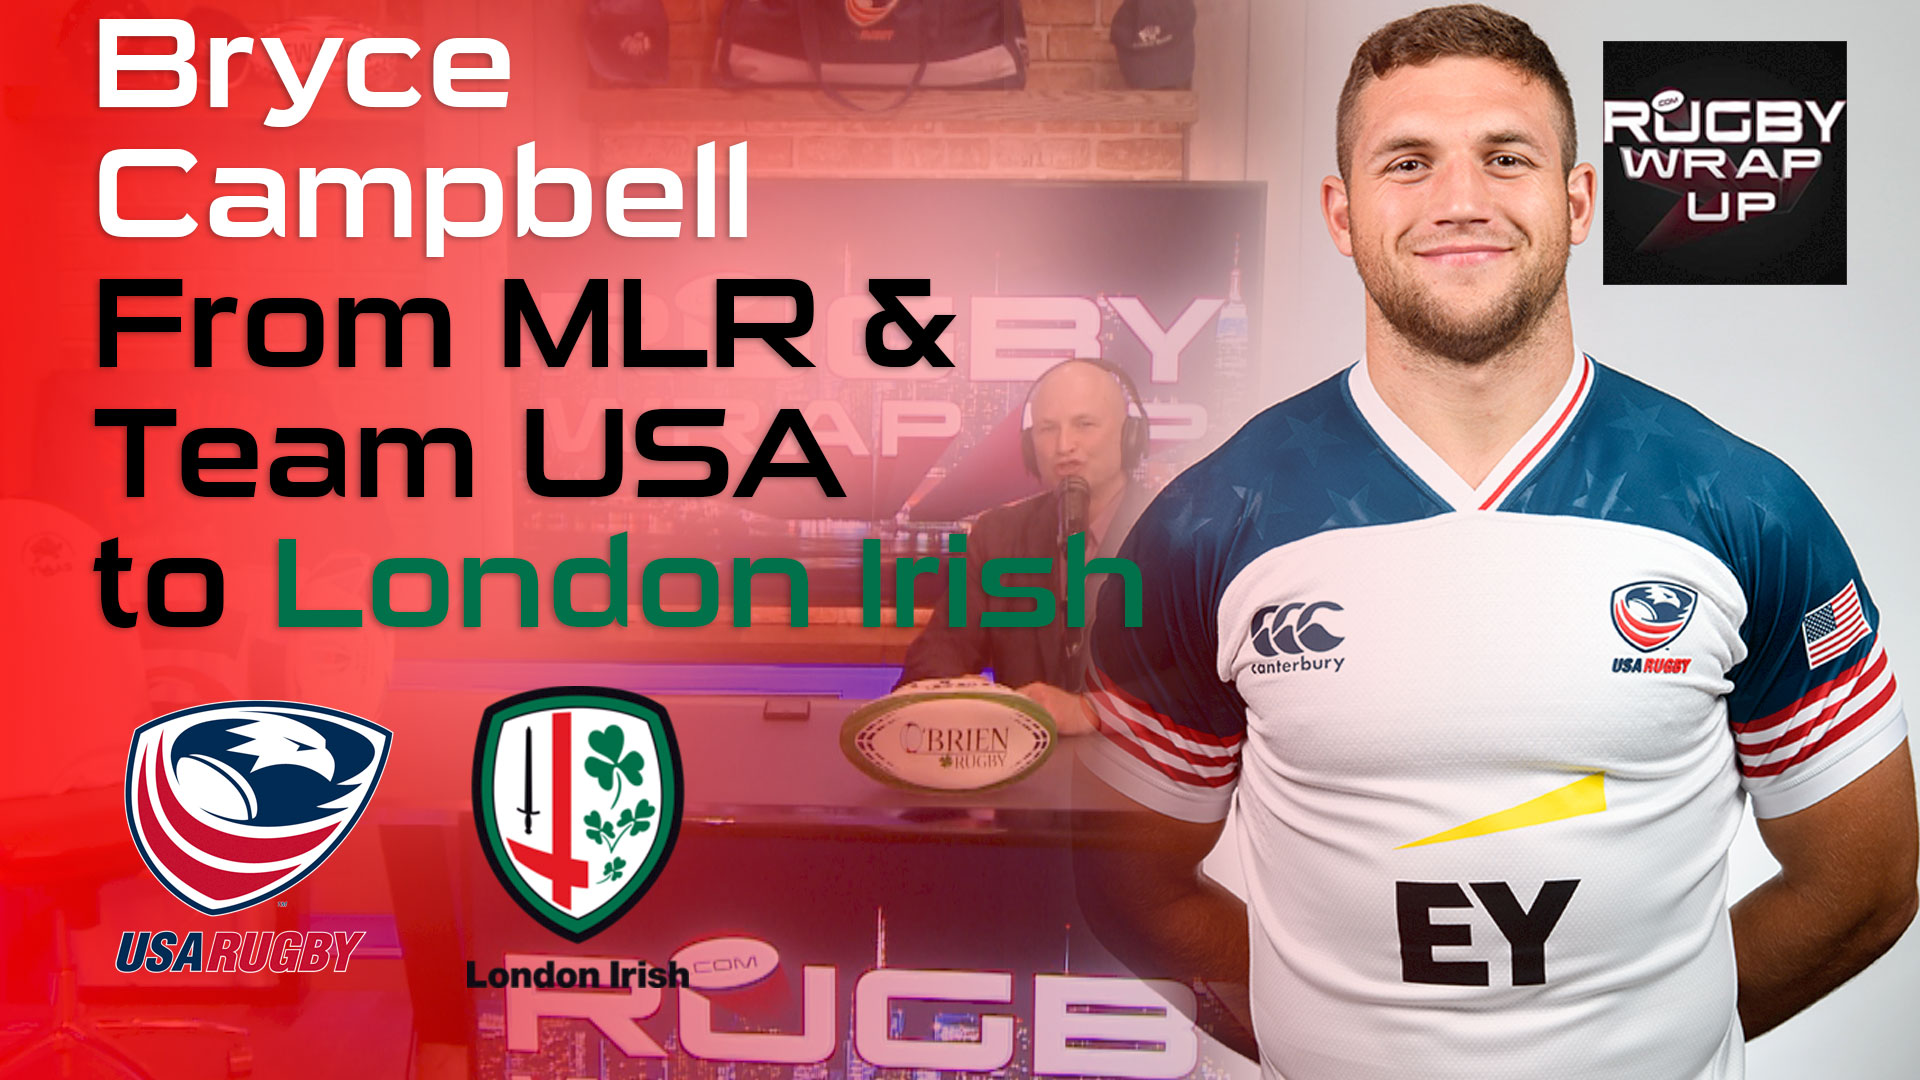 Bryce Campbell, London Irish, USA Rugby, Rugby_Wrap_Up